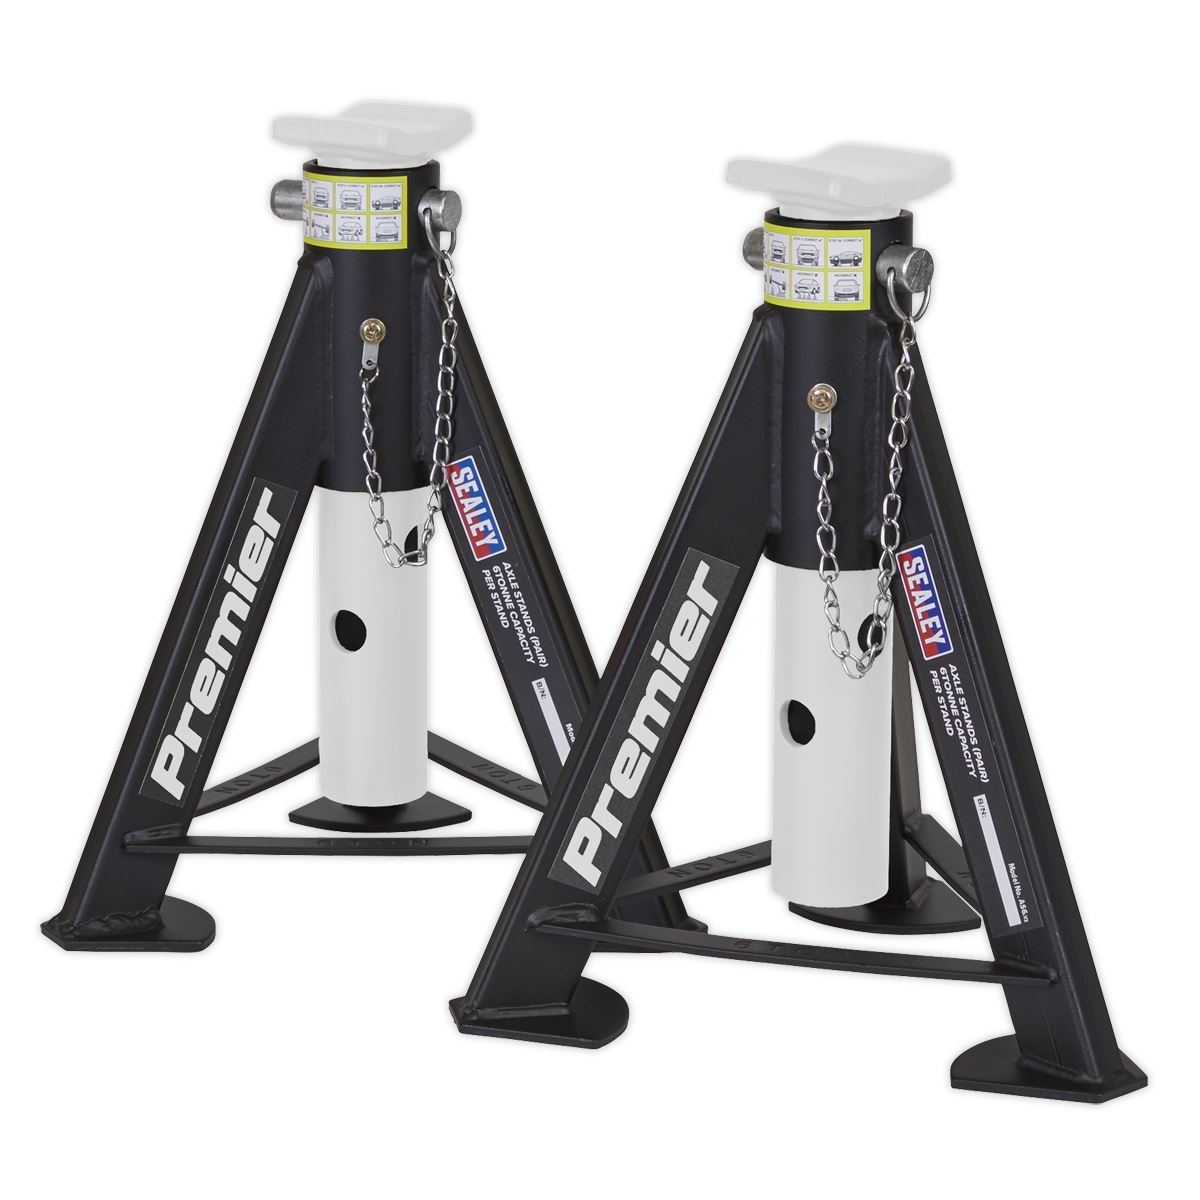 Sealey Premier Axle Stands (Pair) 6 Tonne Capacity per Stand - White